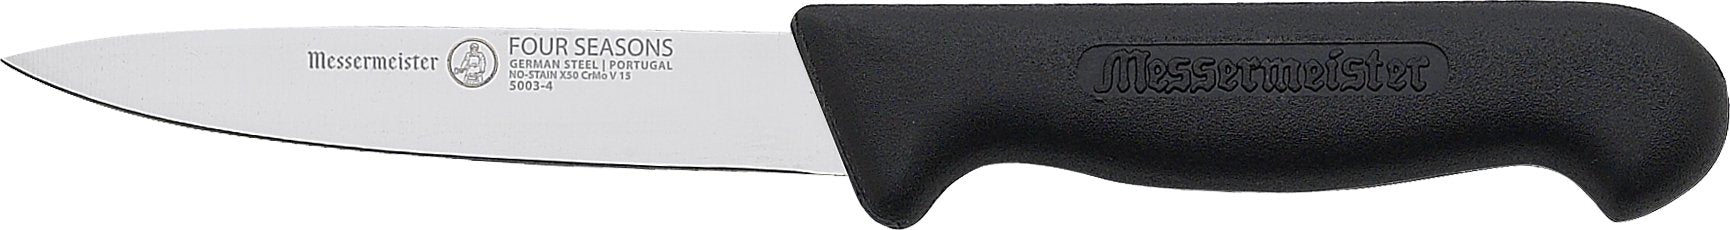 Messemeister 4 Spear Point Paring Knife, Four Seasons